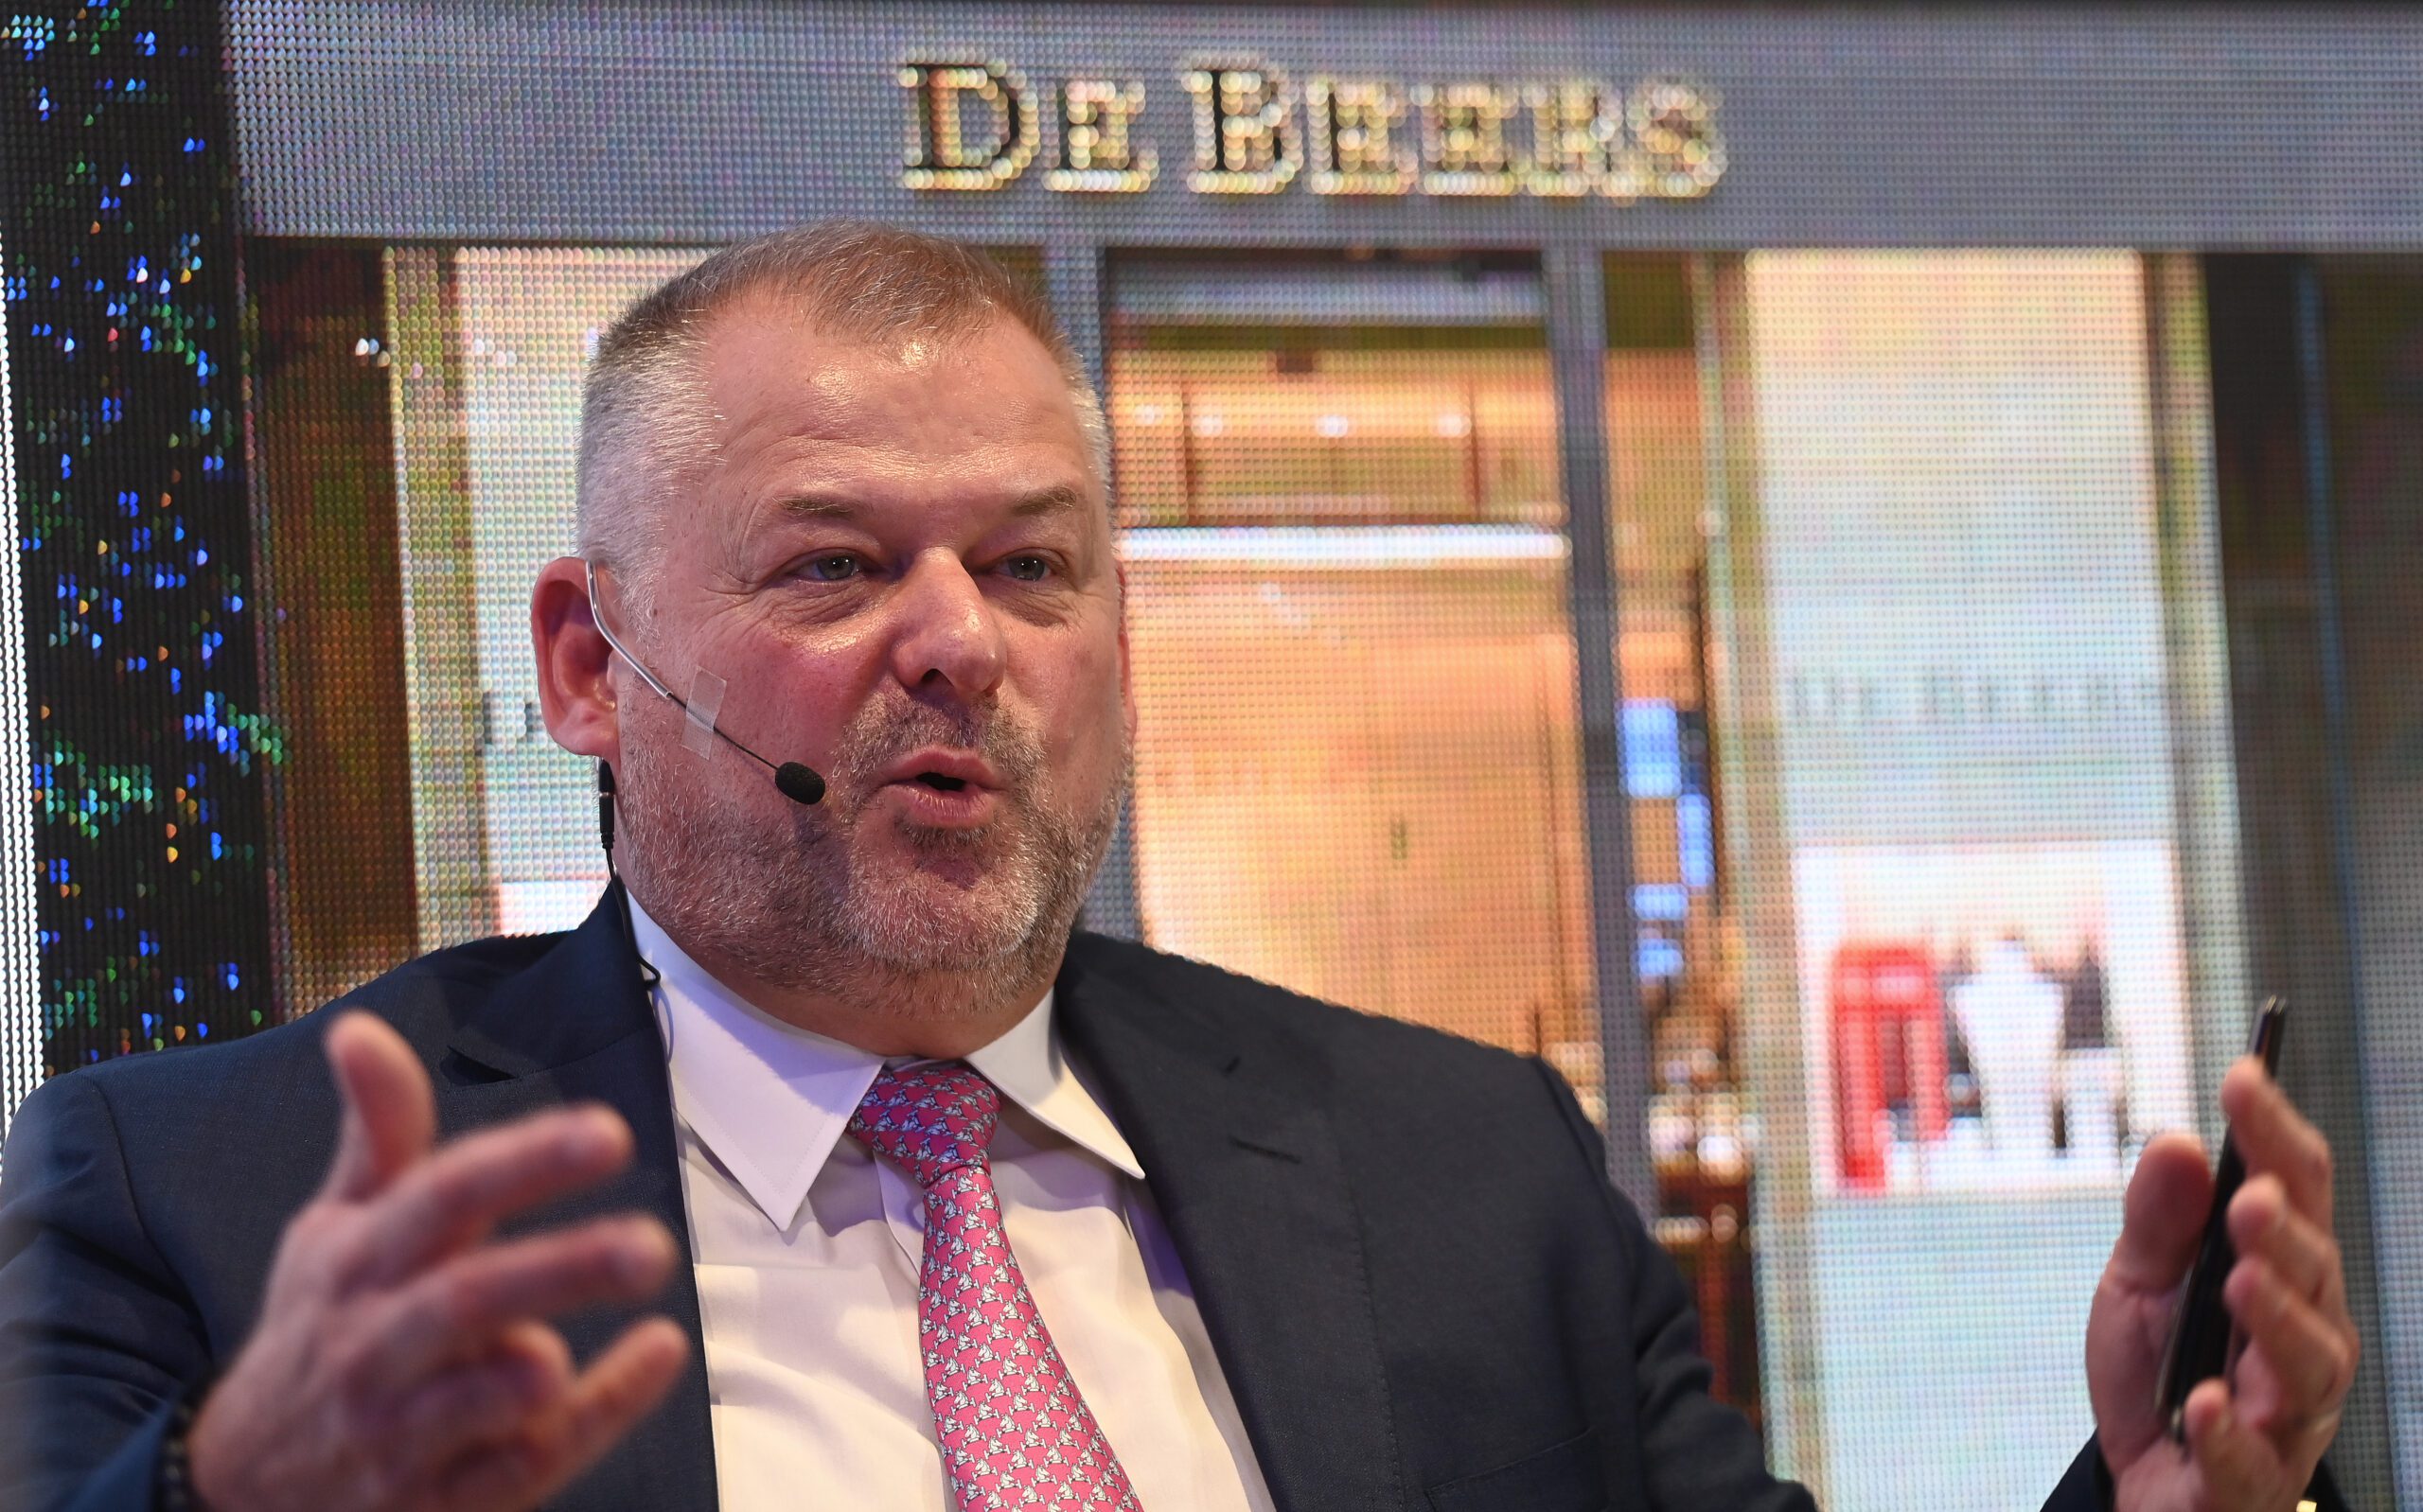 De Beers Sees Evolution of More Synergies in the New Deal – The